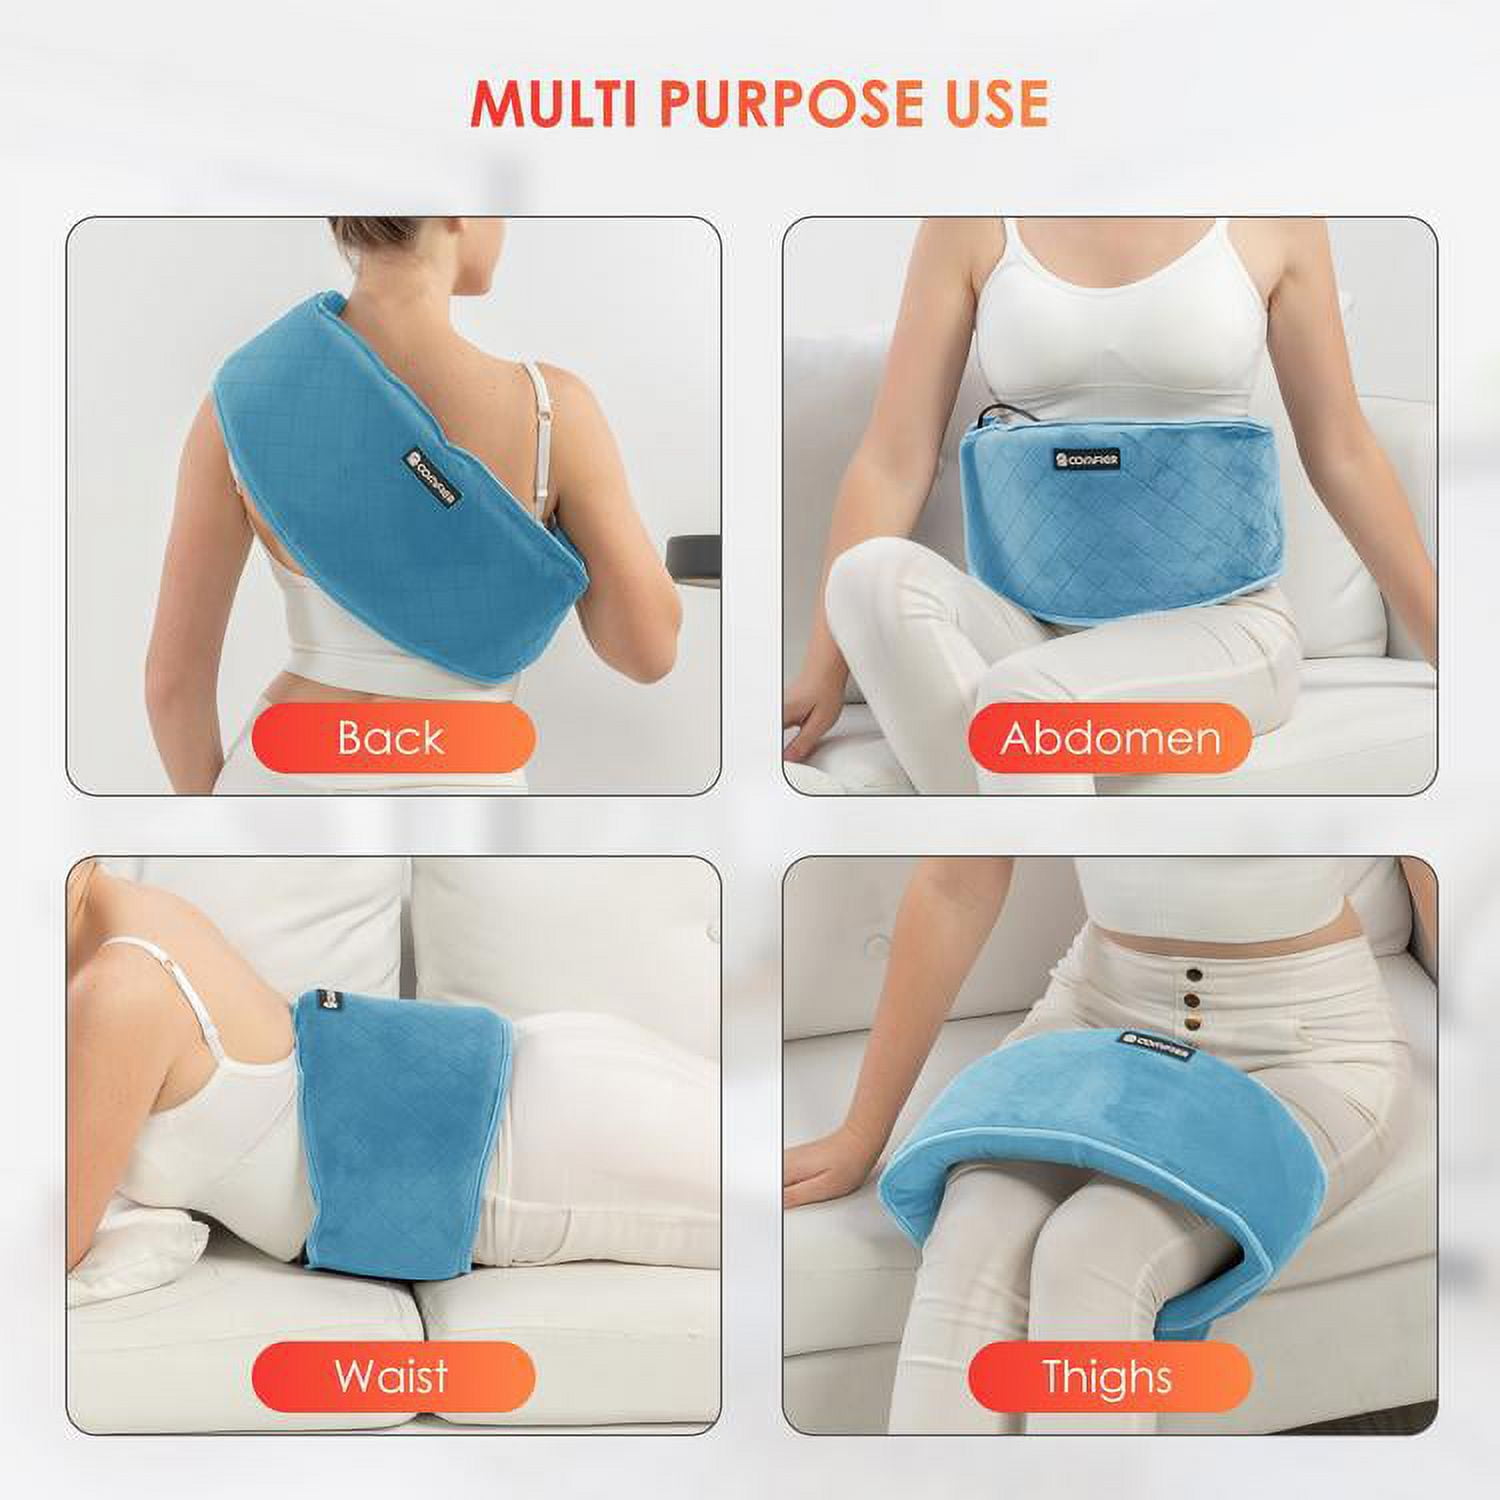 COMFIER Cordless Heating Pad for Back Pain Relief,Lower Back Massaager with  Heat, Heat Pads for Back,Cramps,Lumbar,Abdominal,Leg, Arthritic Pain,Gifts